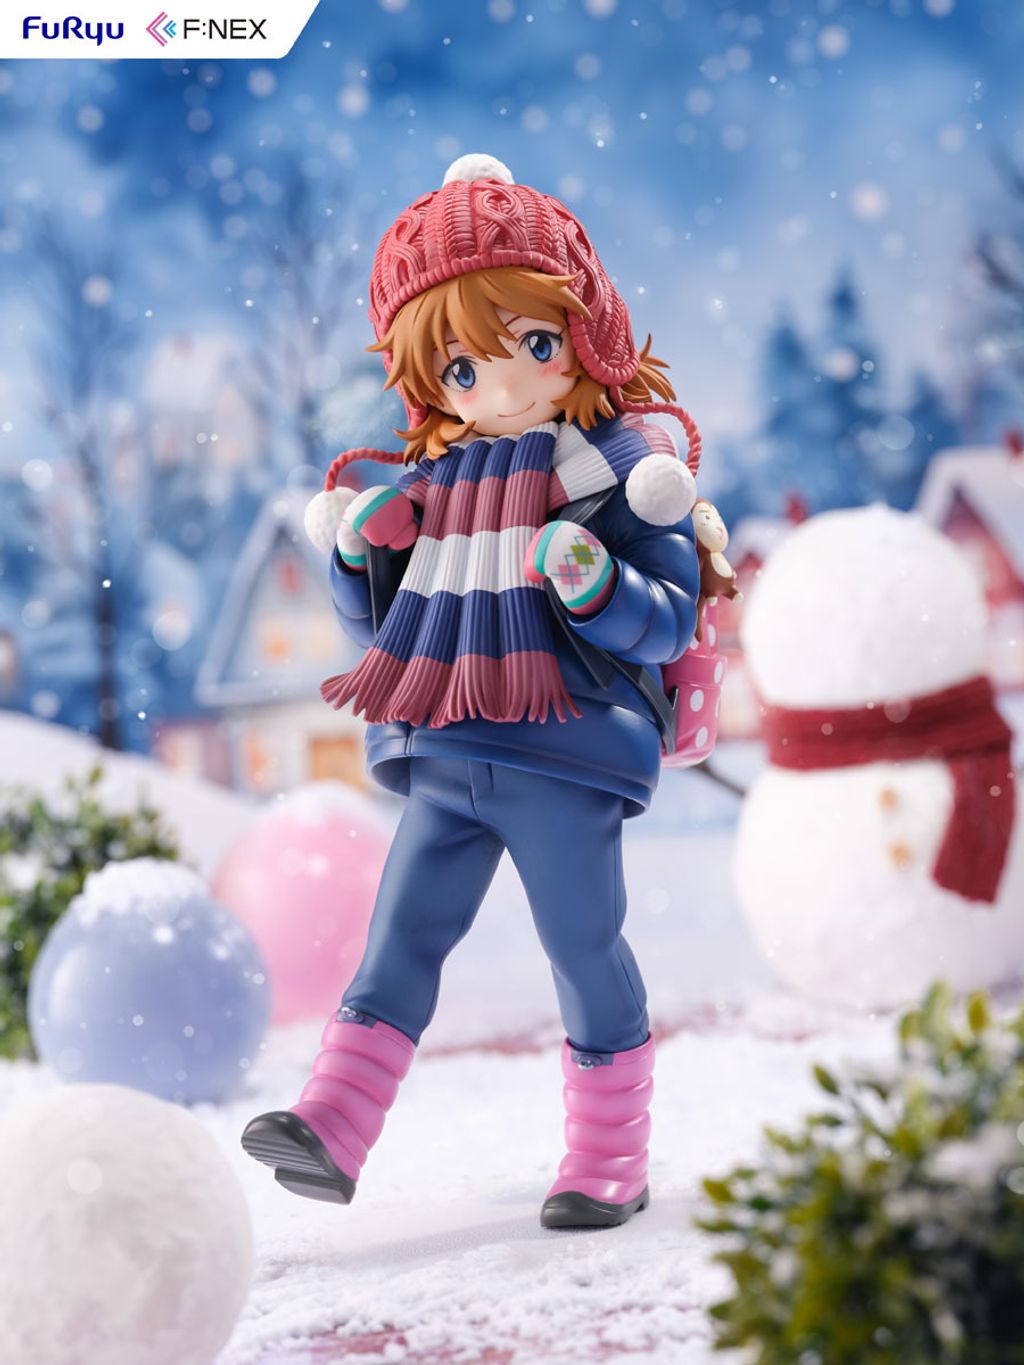 Evangelion 3.0+1.0 Thrice Upon a Time Asuka Shikinami Langley Winter ver. 16 Scale Figure